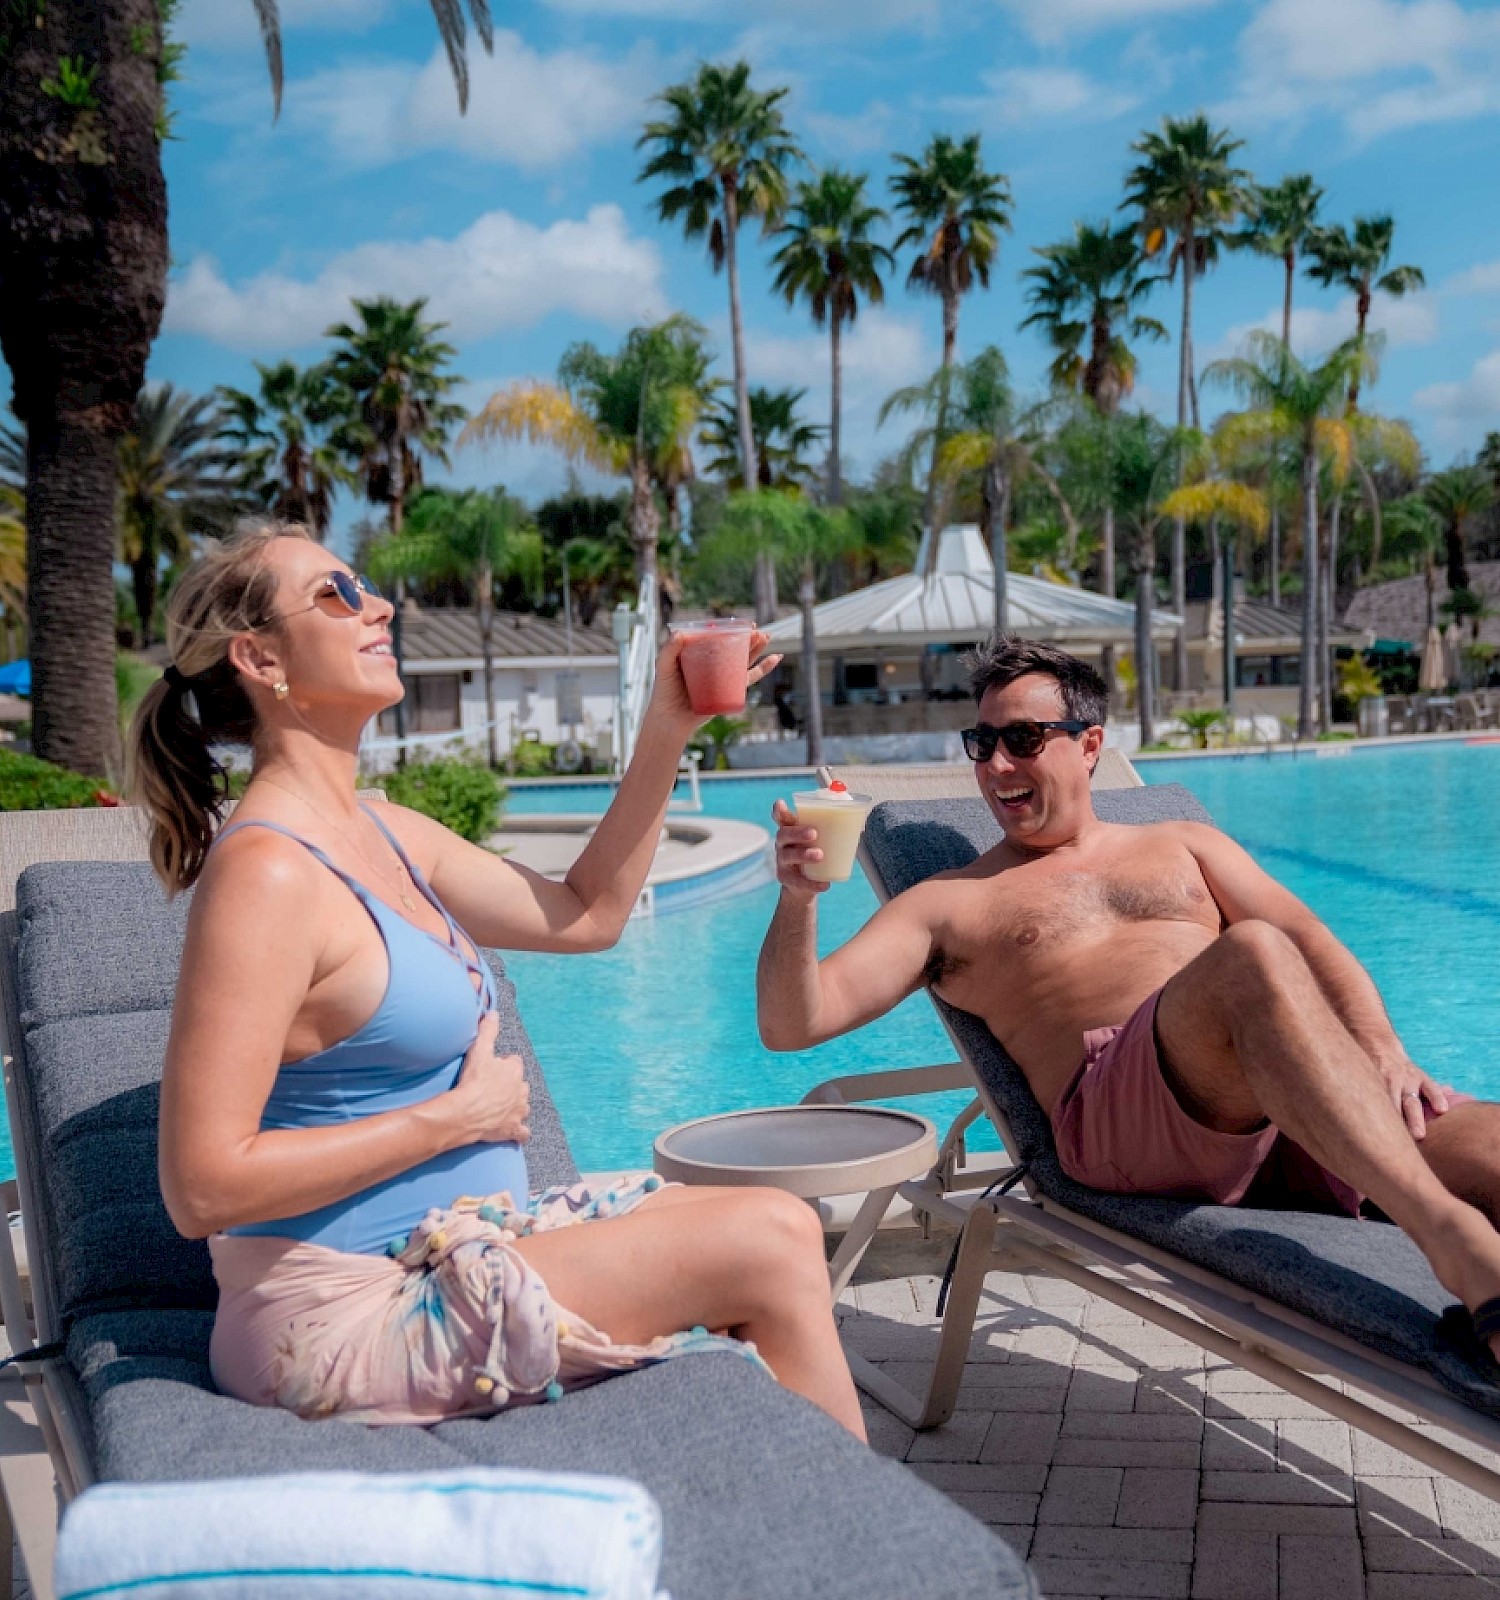 Two people are relaxing by a pool with drinks, enjoying the sunny weather.